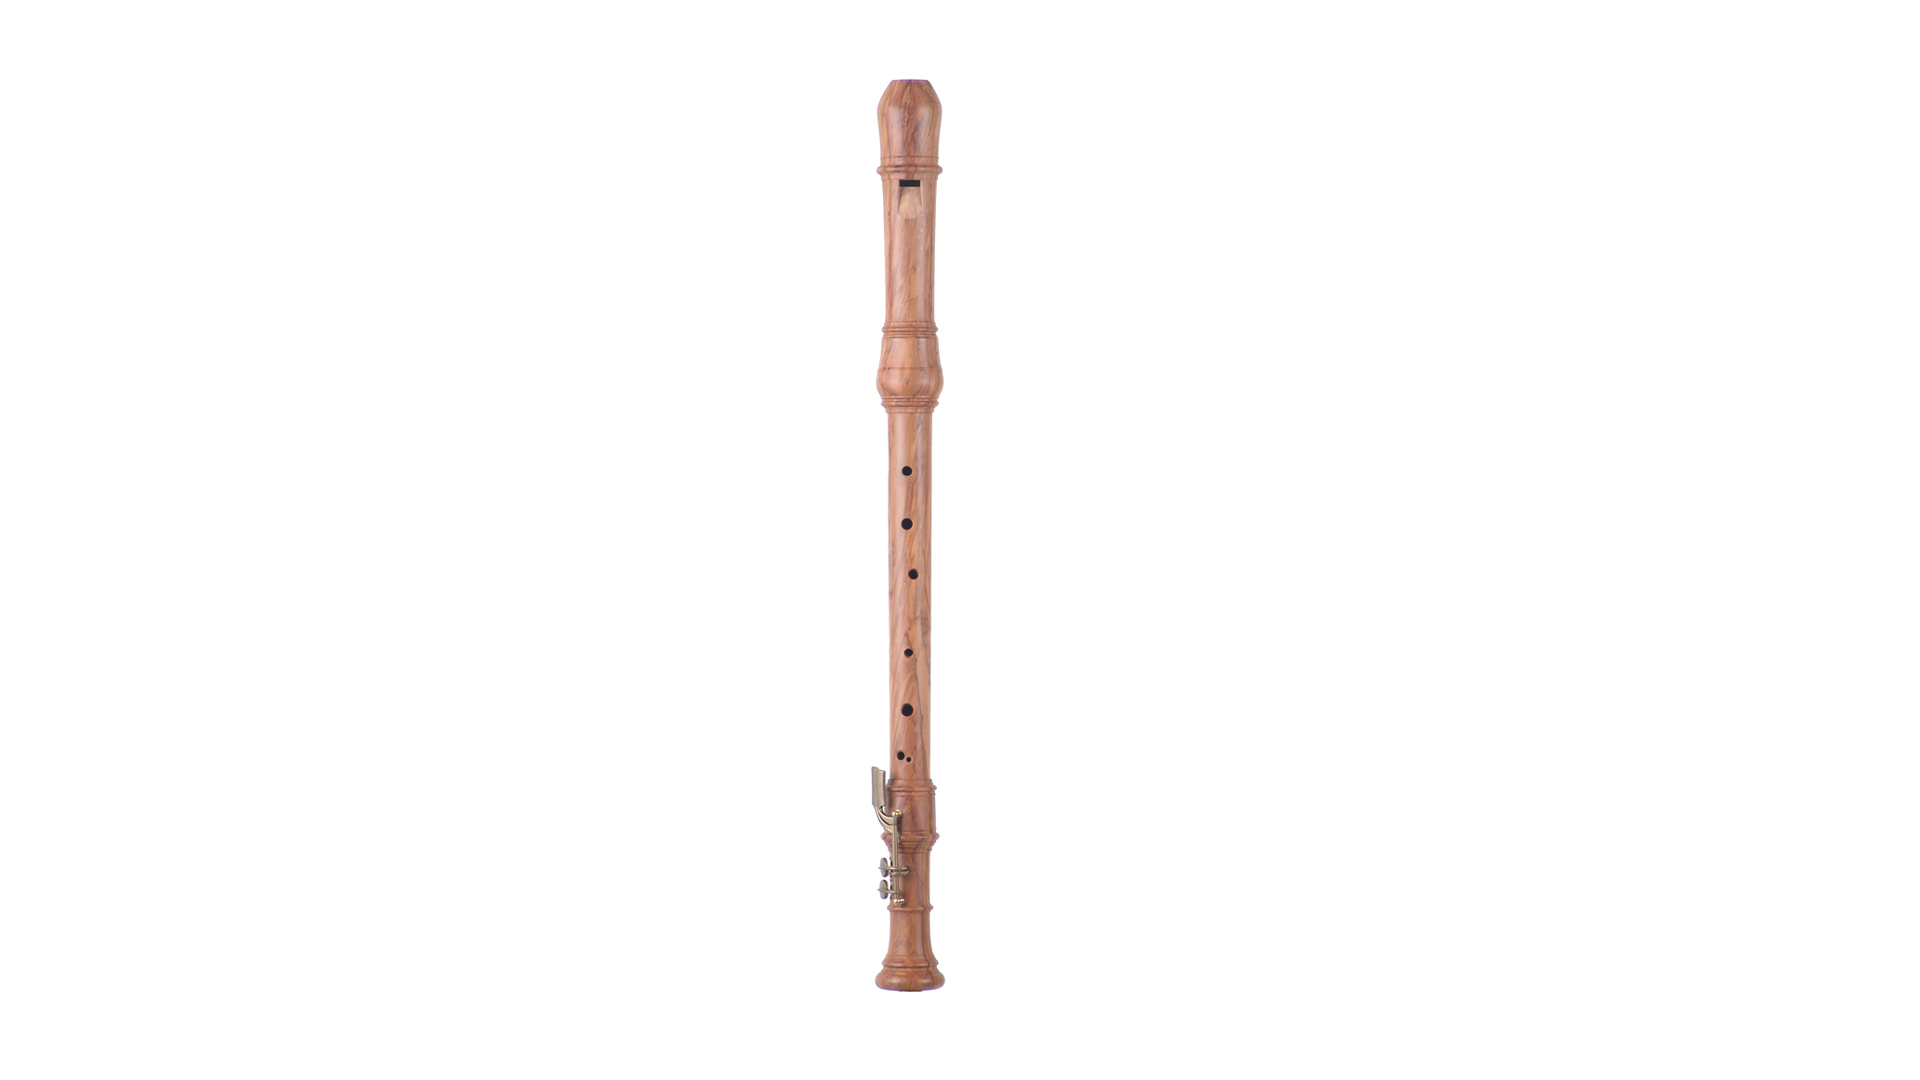 Küng, "SUPERIO", tenor in c', baroque double hole, with double key, olive wood